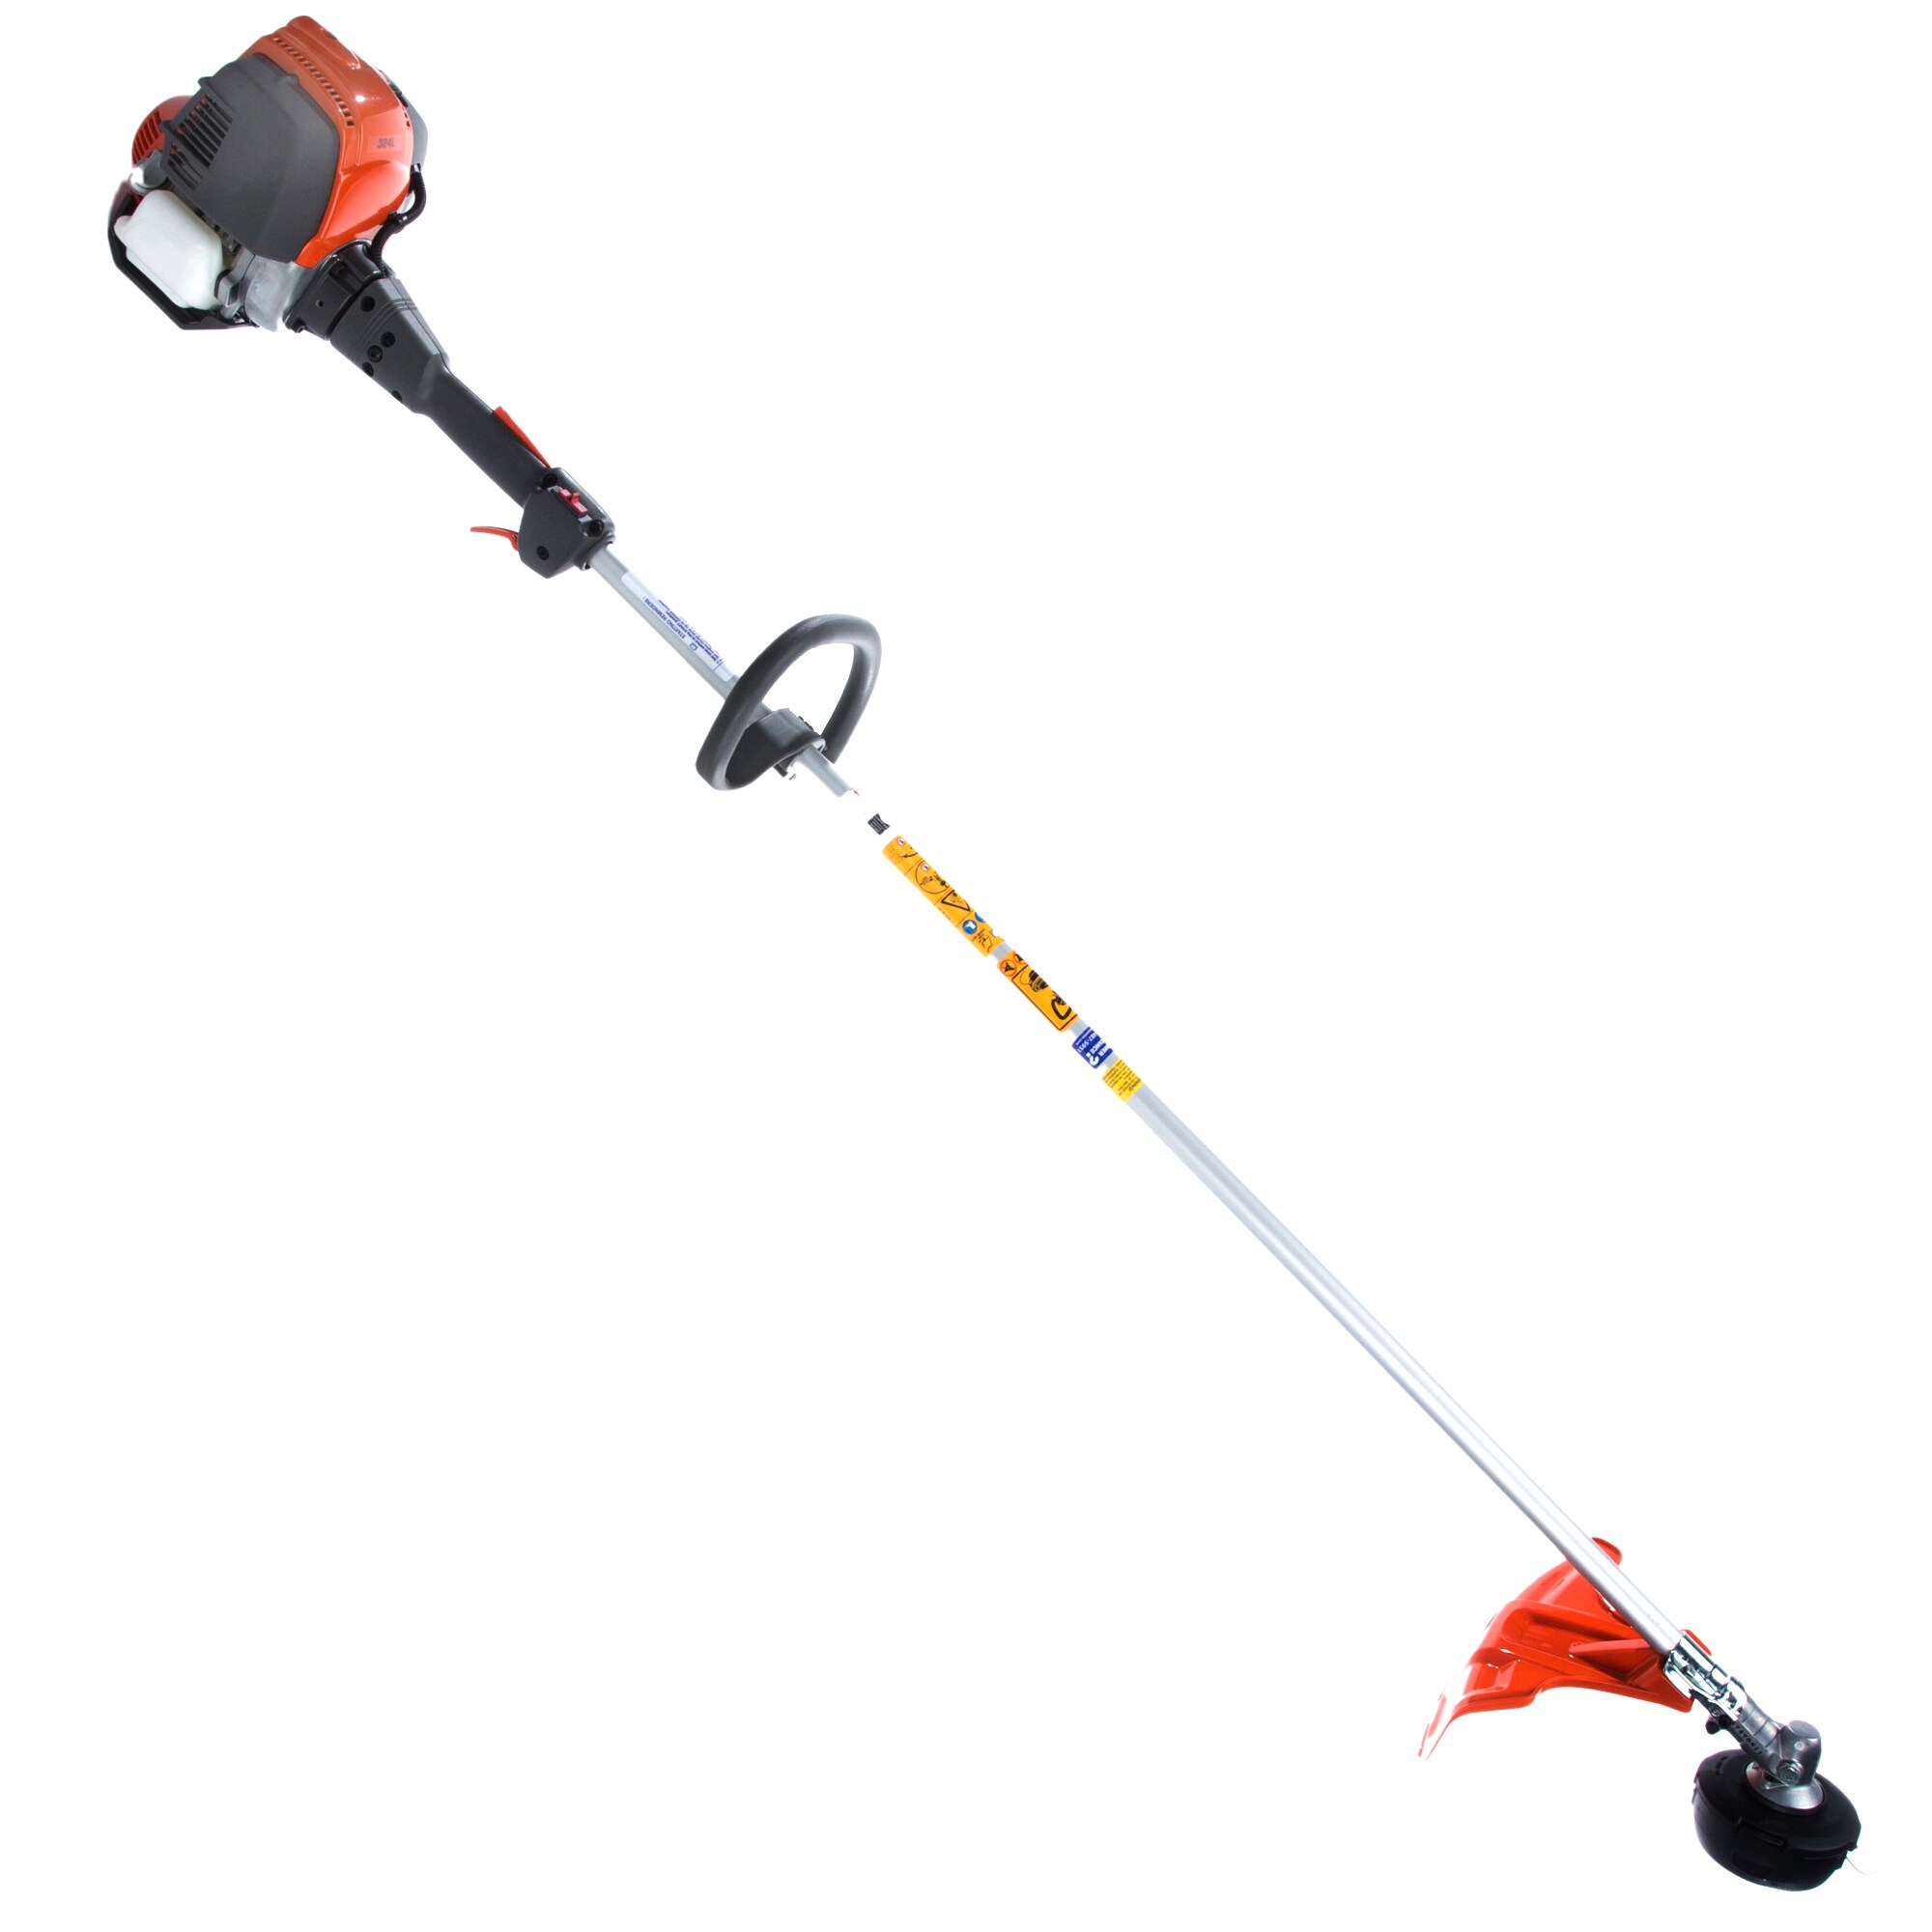 Husqvarna 324l 25 Cc 4 Cycle 18 In Straight Shaft Gas String Trimmer In